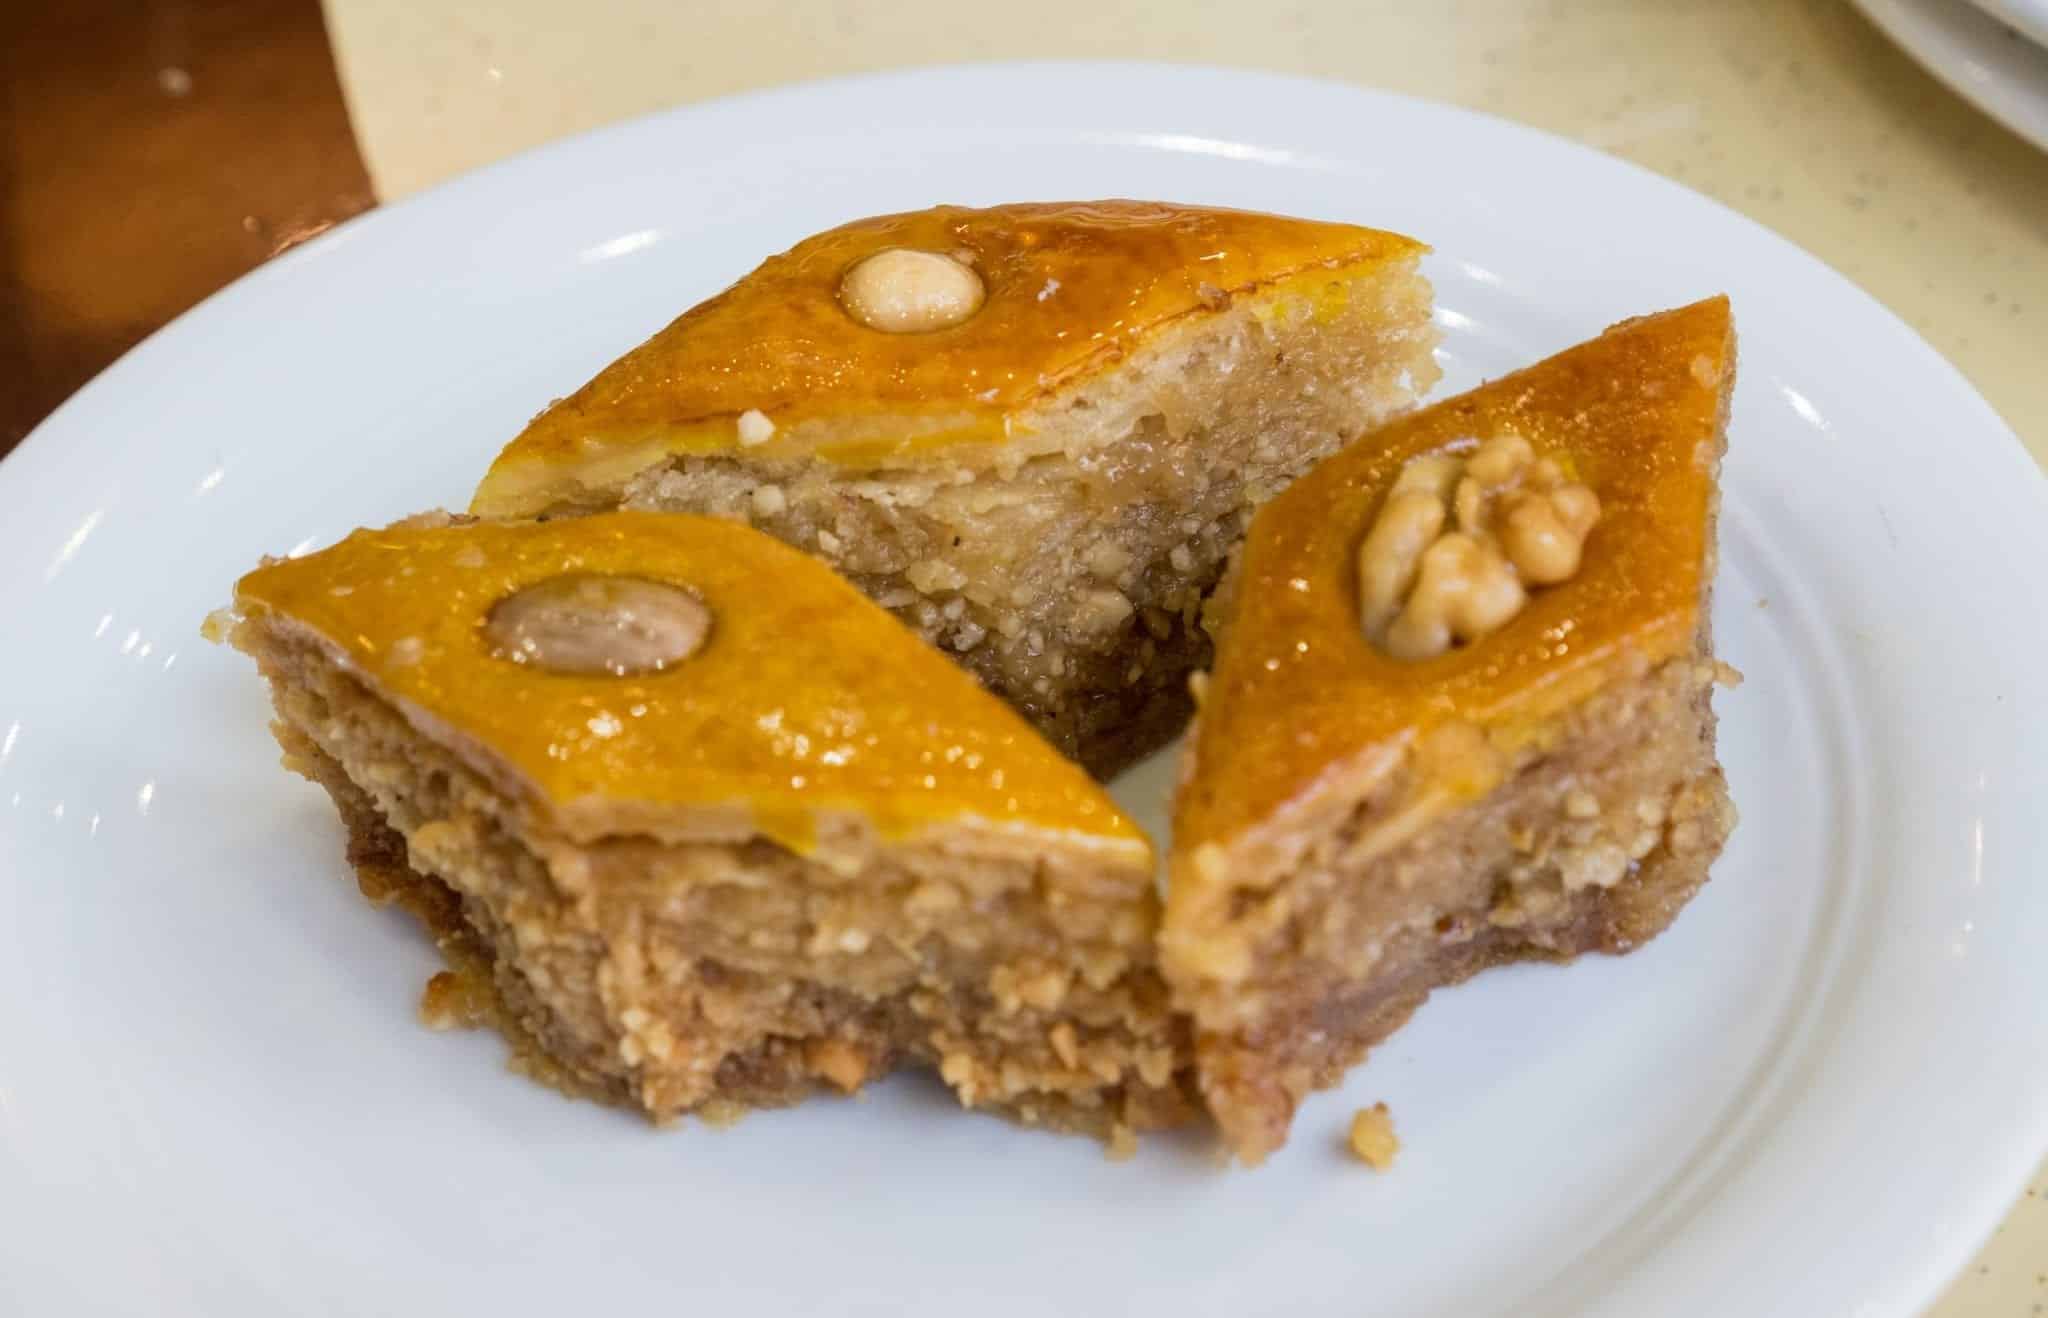 Three pieces of baklava, one topped with an almond, one with a walnut, one with a hazelnut.